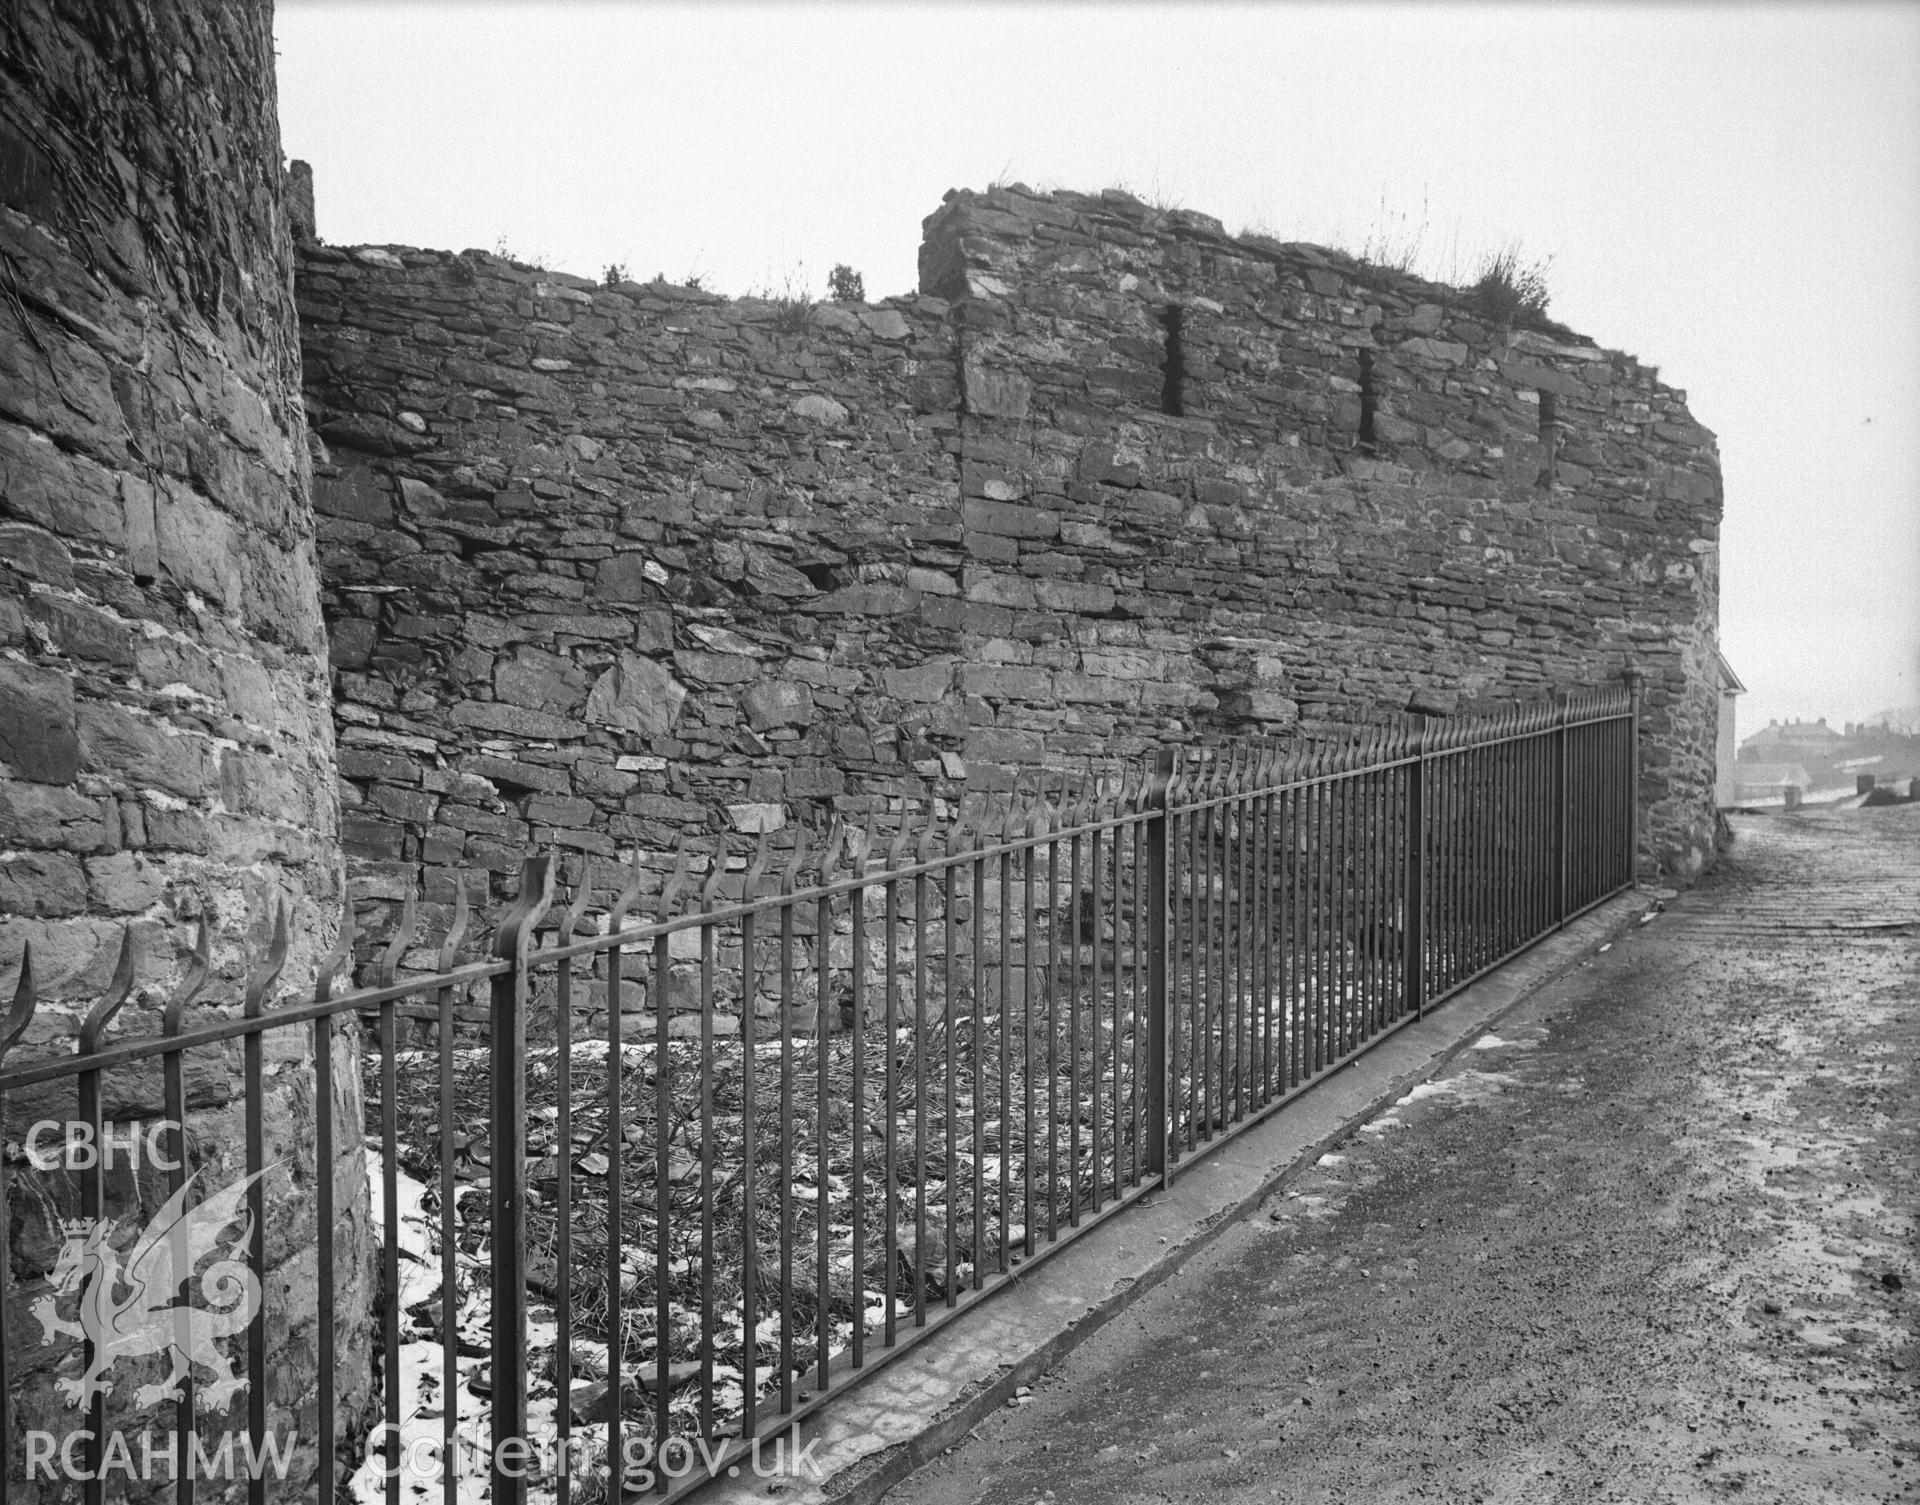 View of Conwy Town Wall taken 01.01.1951.